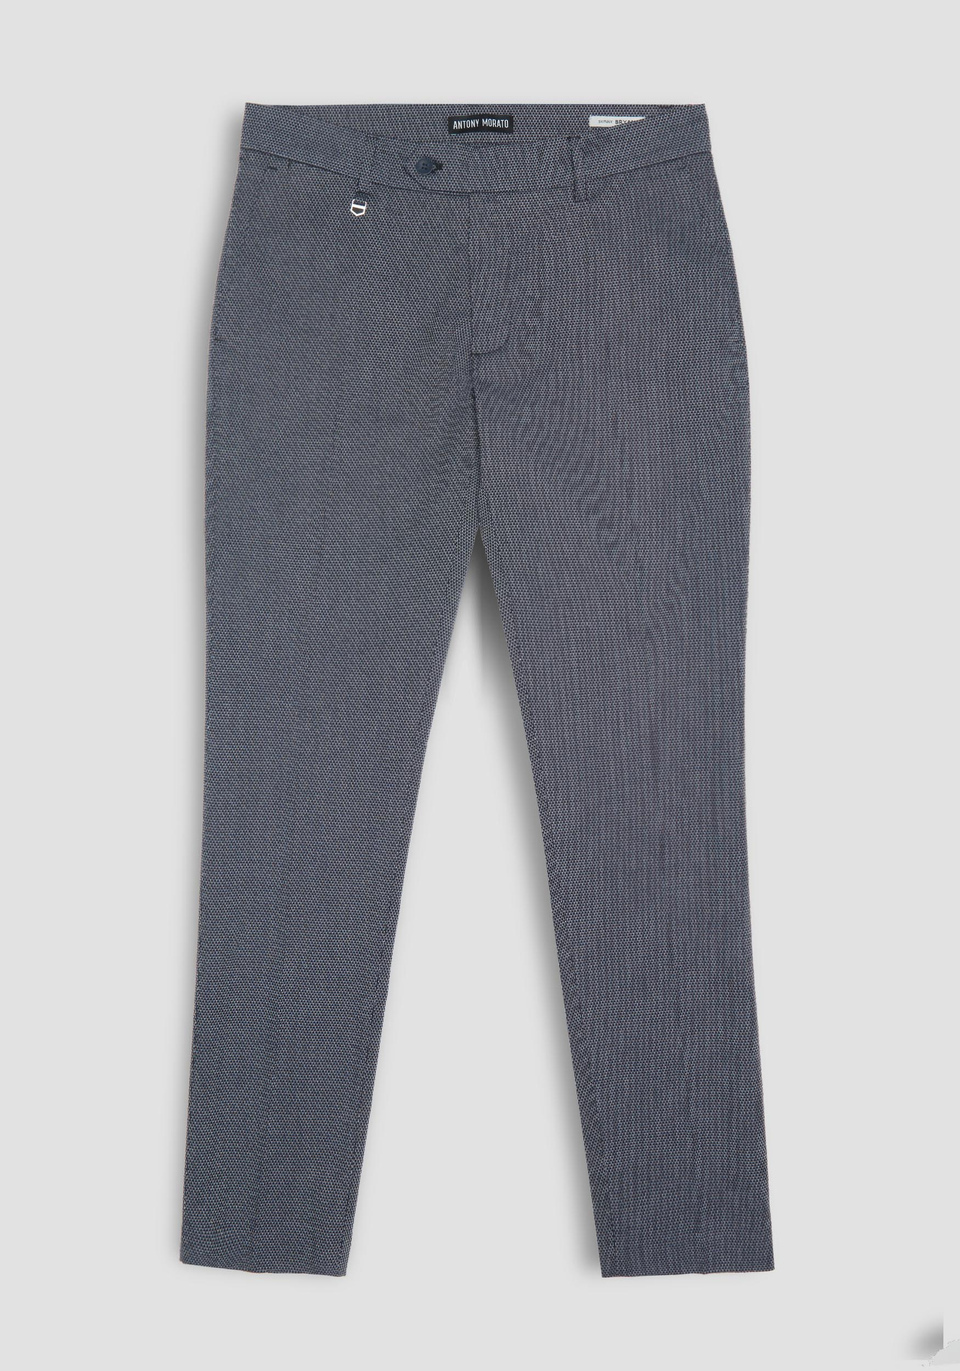 “BRYAN” SKINNY FIT TROUSERS WITH MICRO-PATTERN - Antony Morato Online Shop